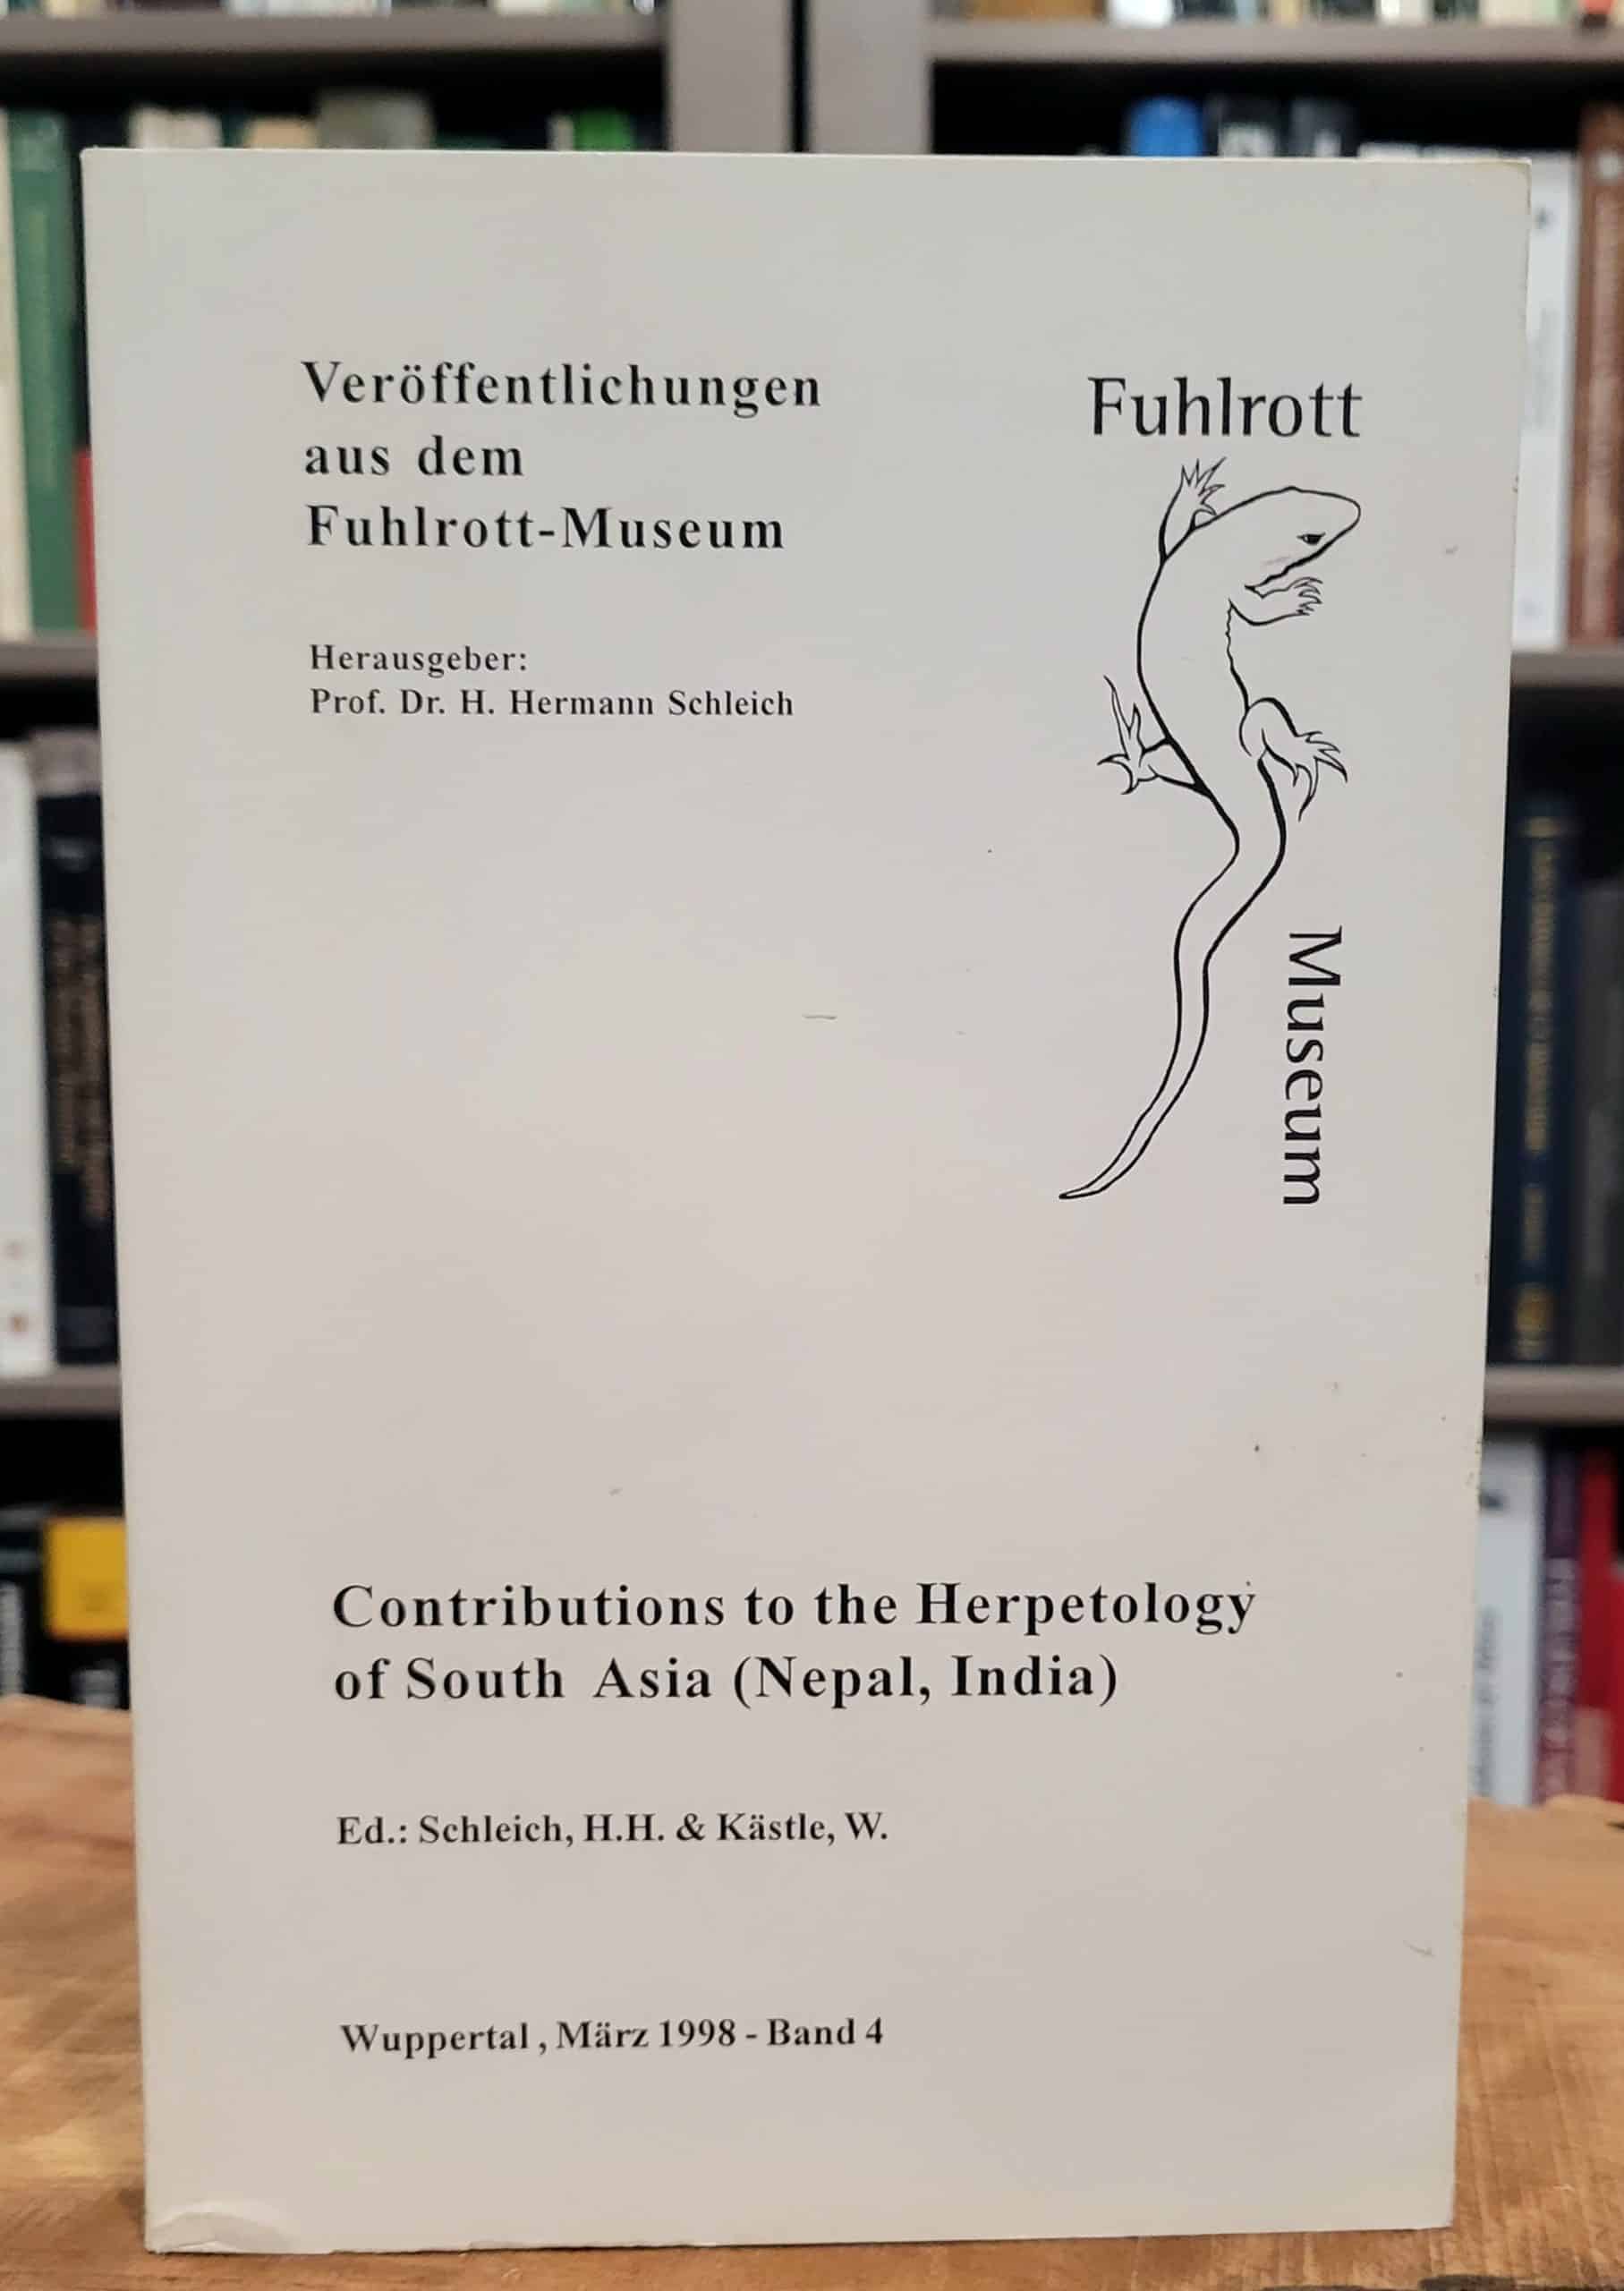 Contributions to the Herpetology of South Asia (Nepal, India)